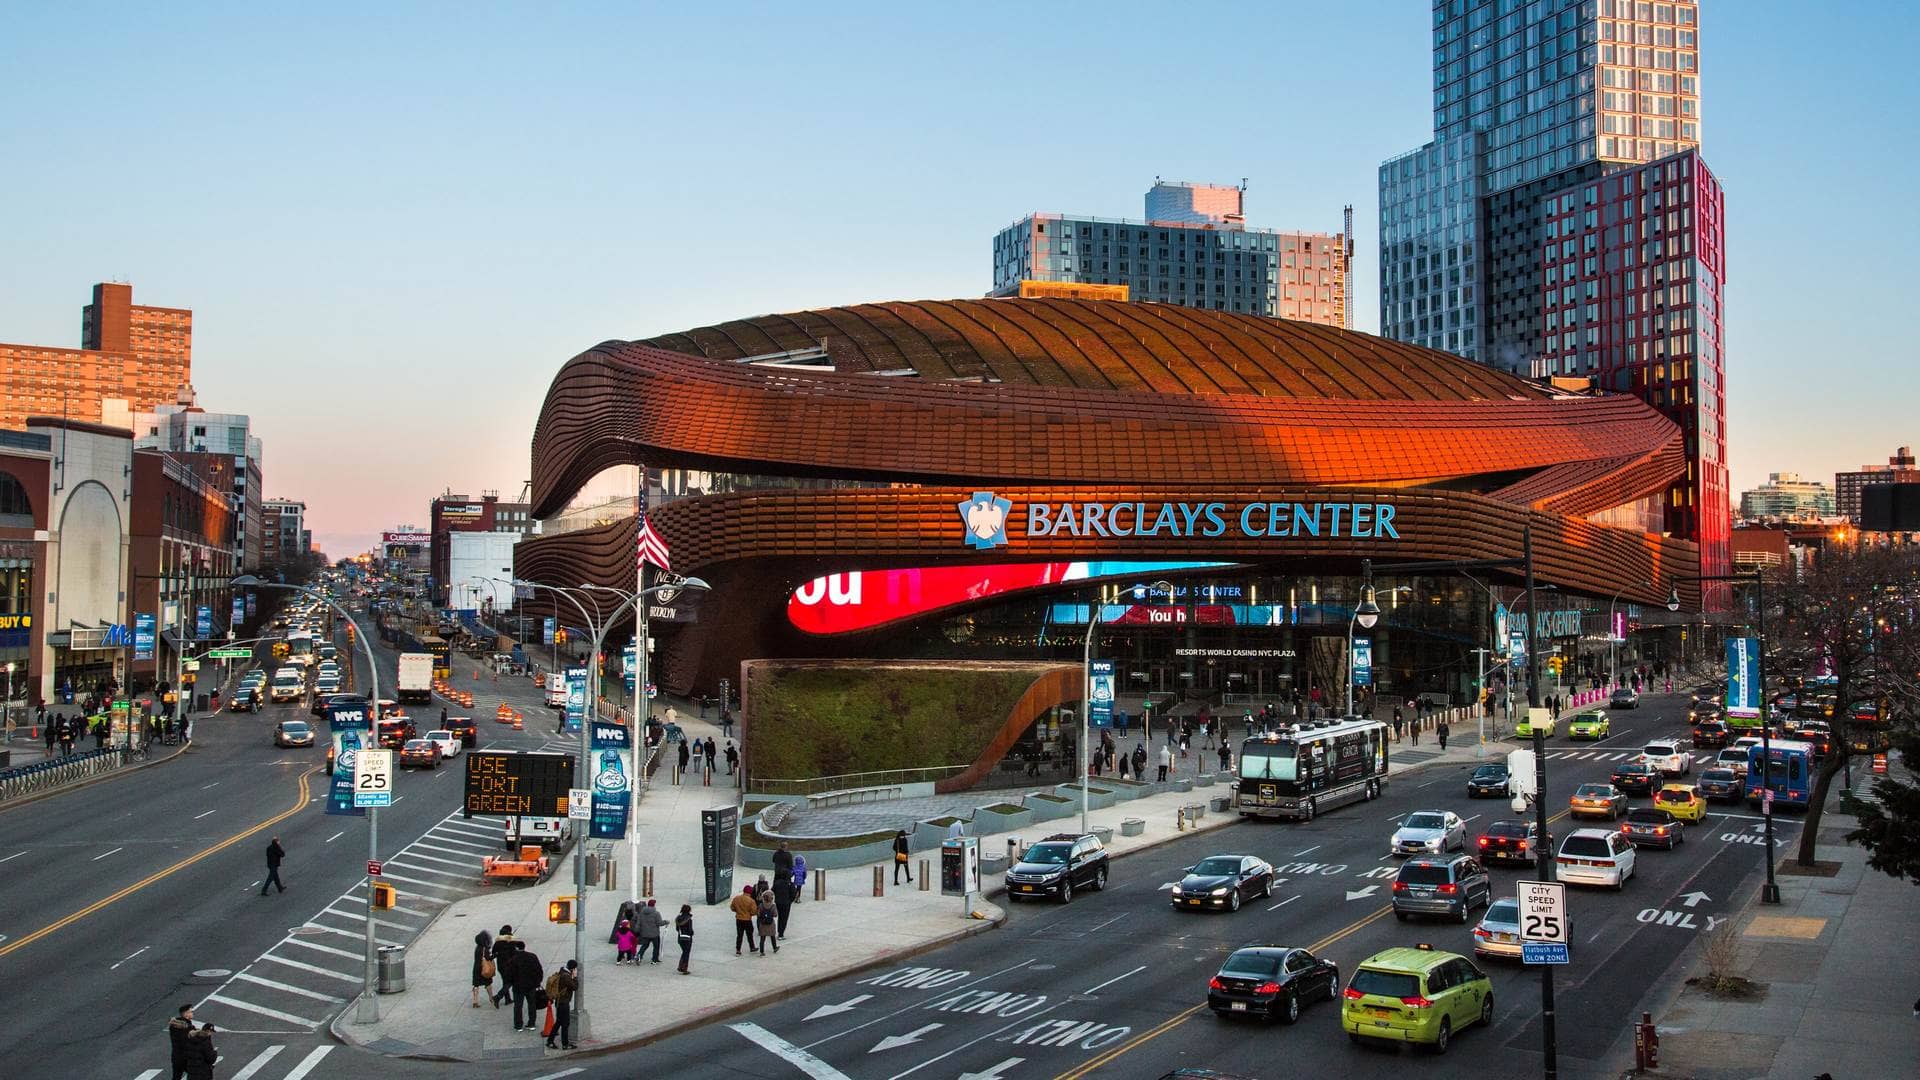 Barclays Center - Biggest NBA Arena By Capacity In The World Now